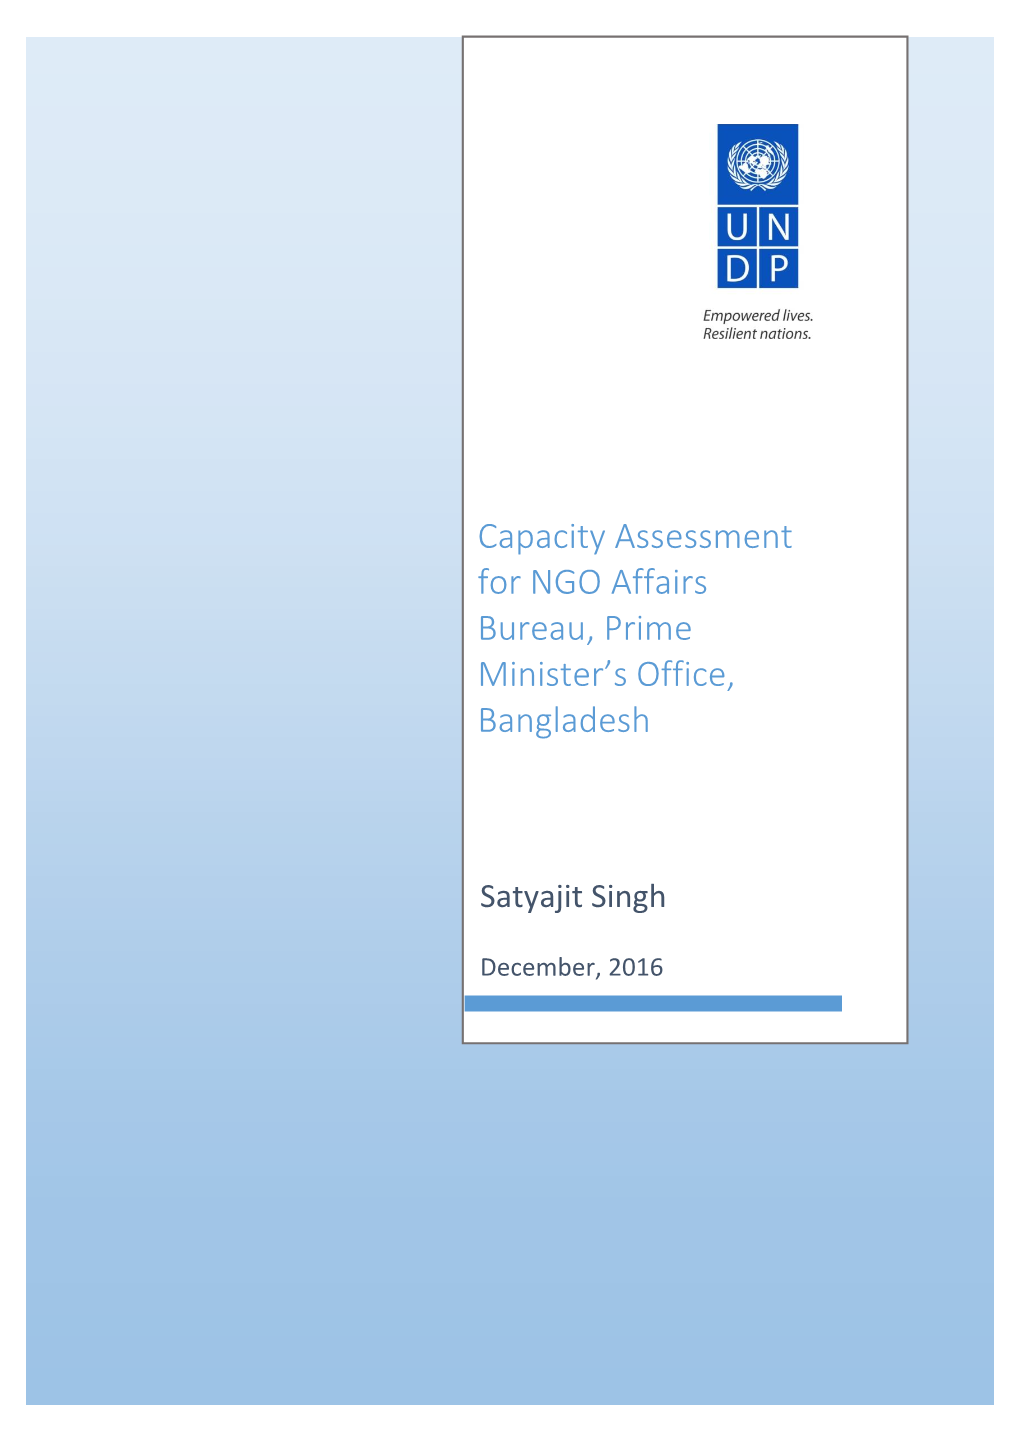 Capacity Assessment for NGO Affairs Bureau, Prime Minister's Office